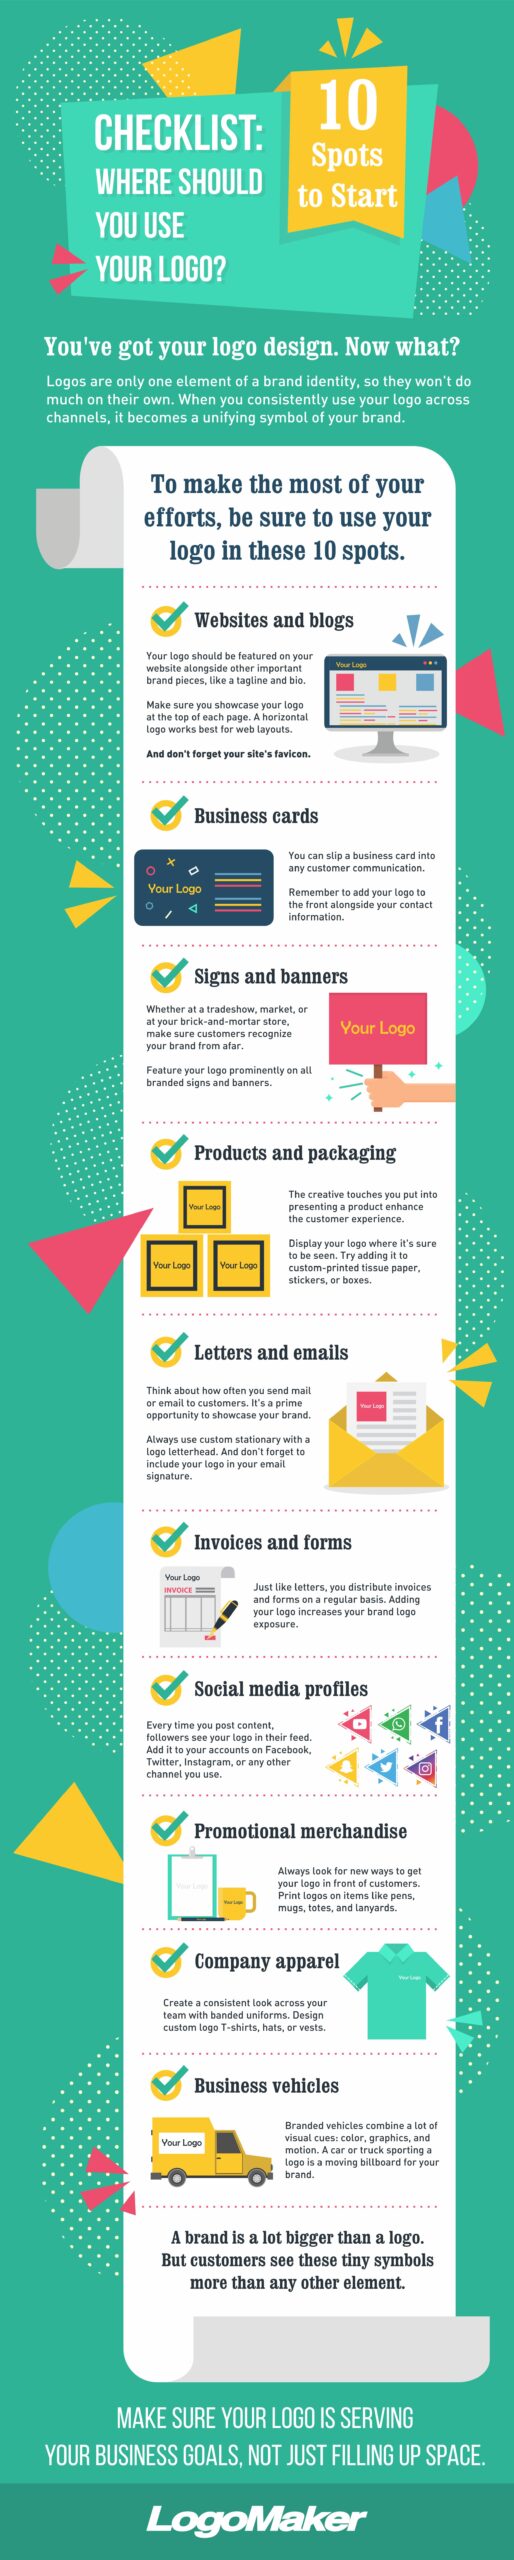 Infographic displaying where you should use your logo design such as websites businessc cards signs and banners products and packaging